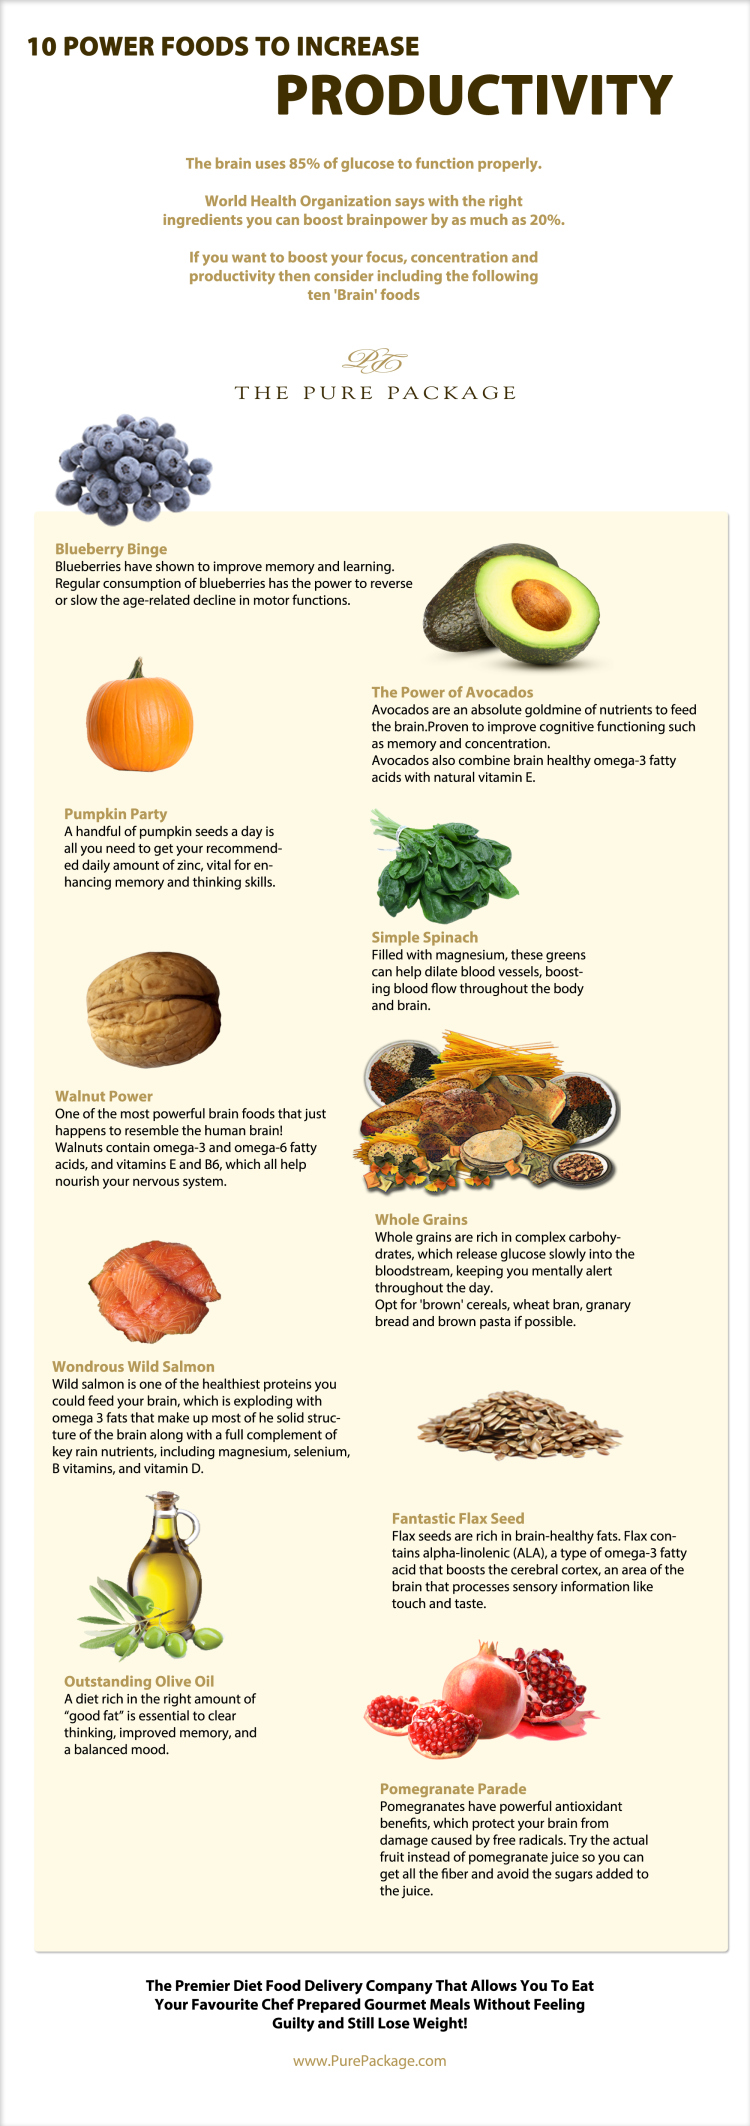 Power Foods That Increase Productivity